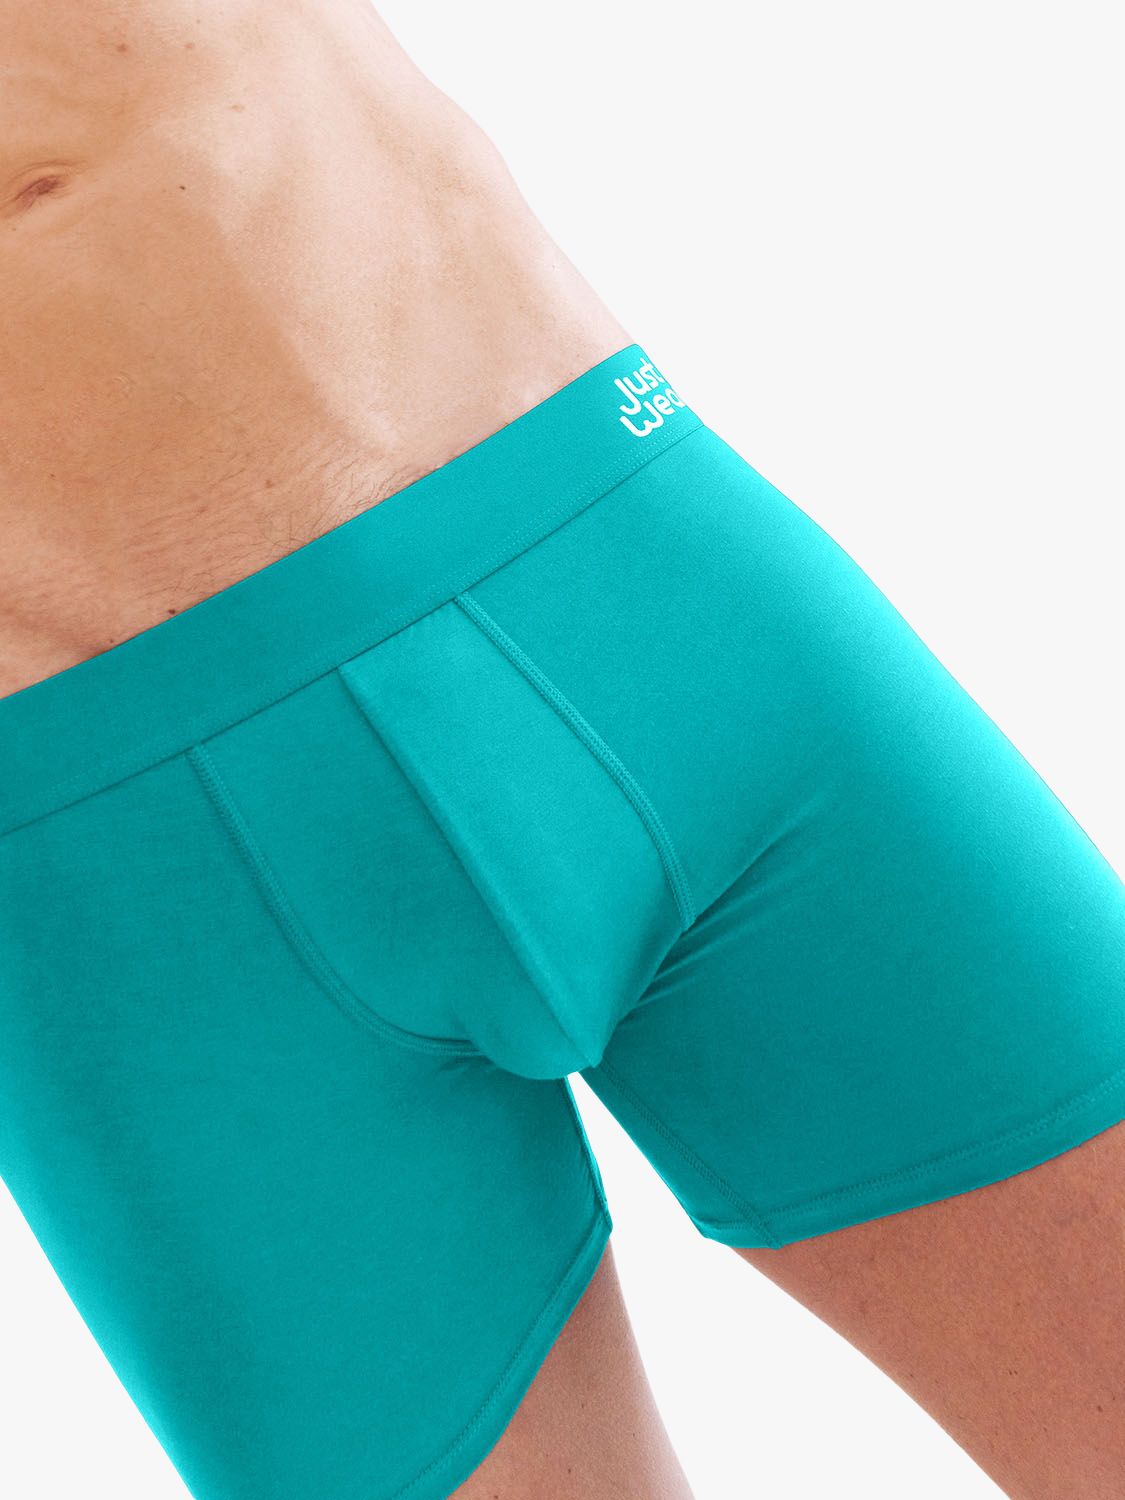 JustWears Active Trunks, Pack of 6, £95.70